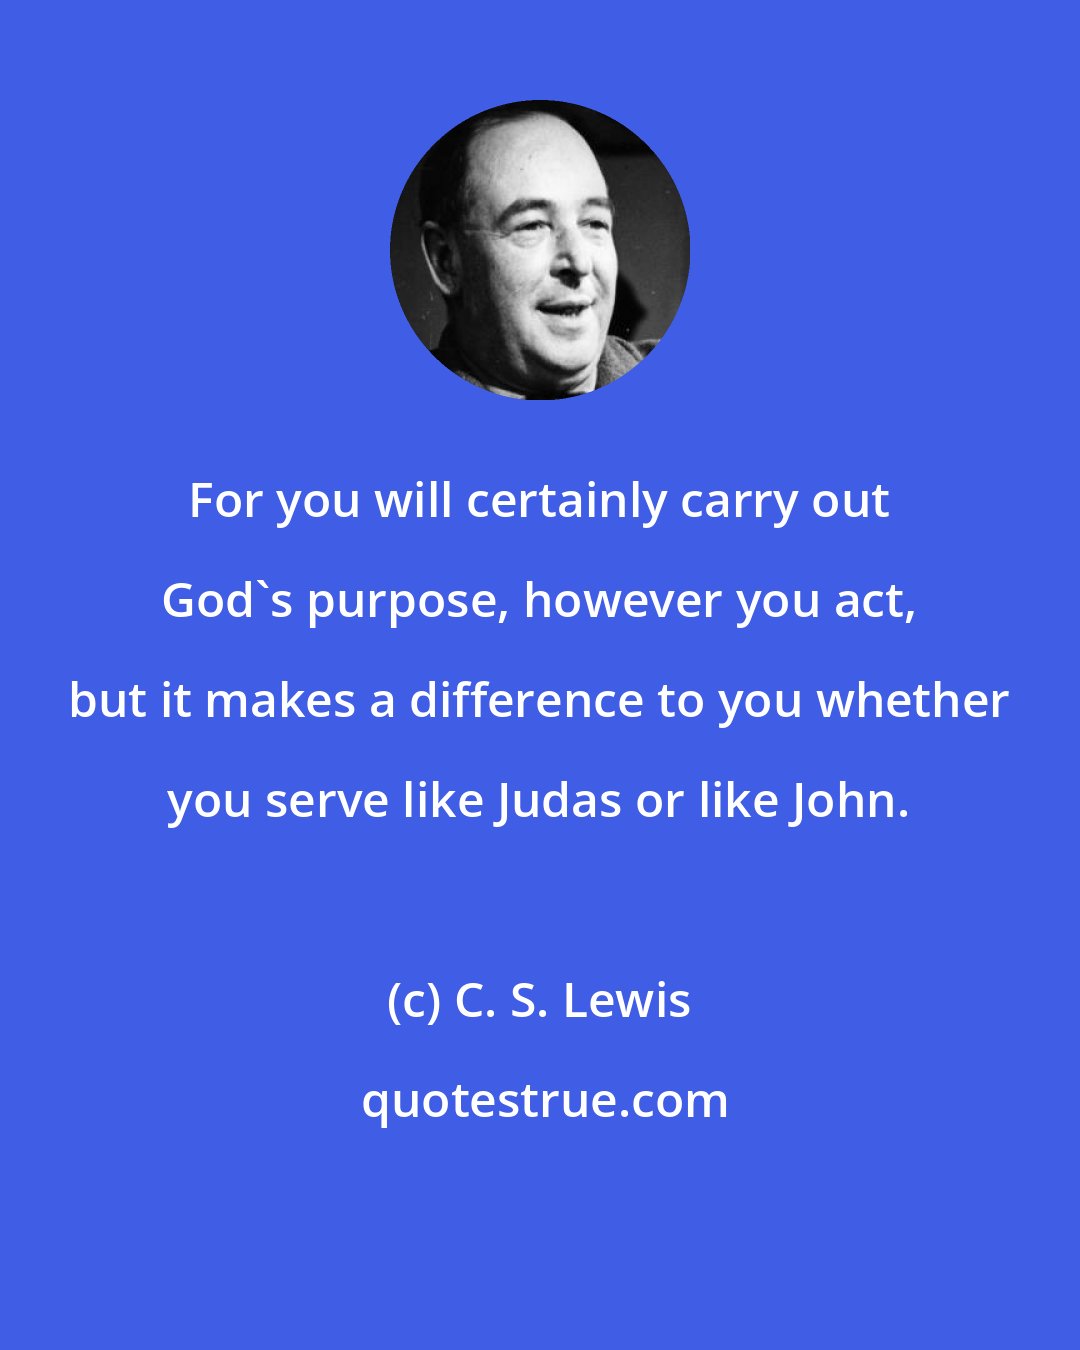 C. S. Lewis: For you will certainly carry out God's purpose, however you act, but it makes a difference to you whether you serve like Judas or like John.